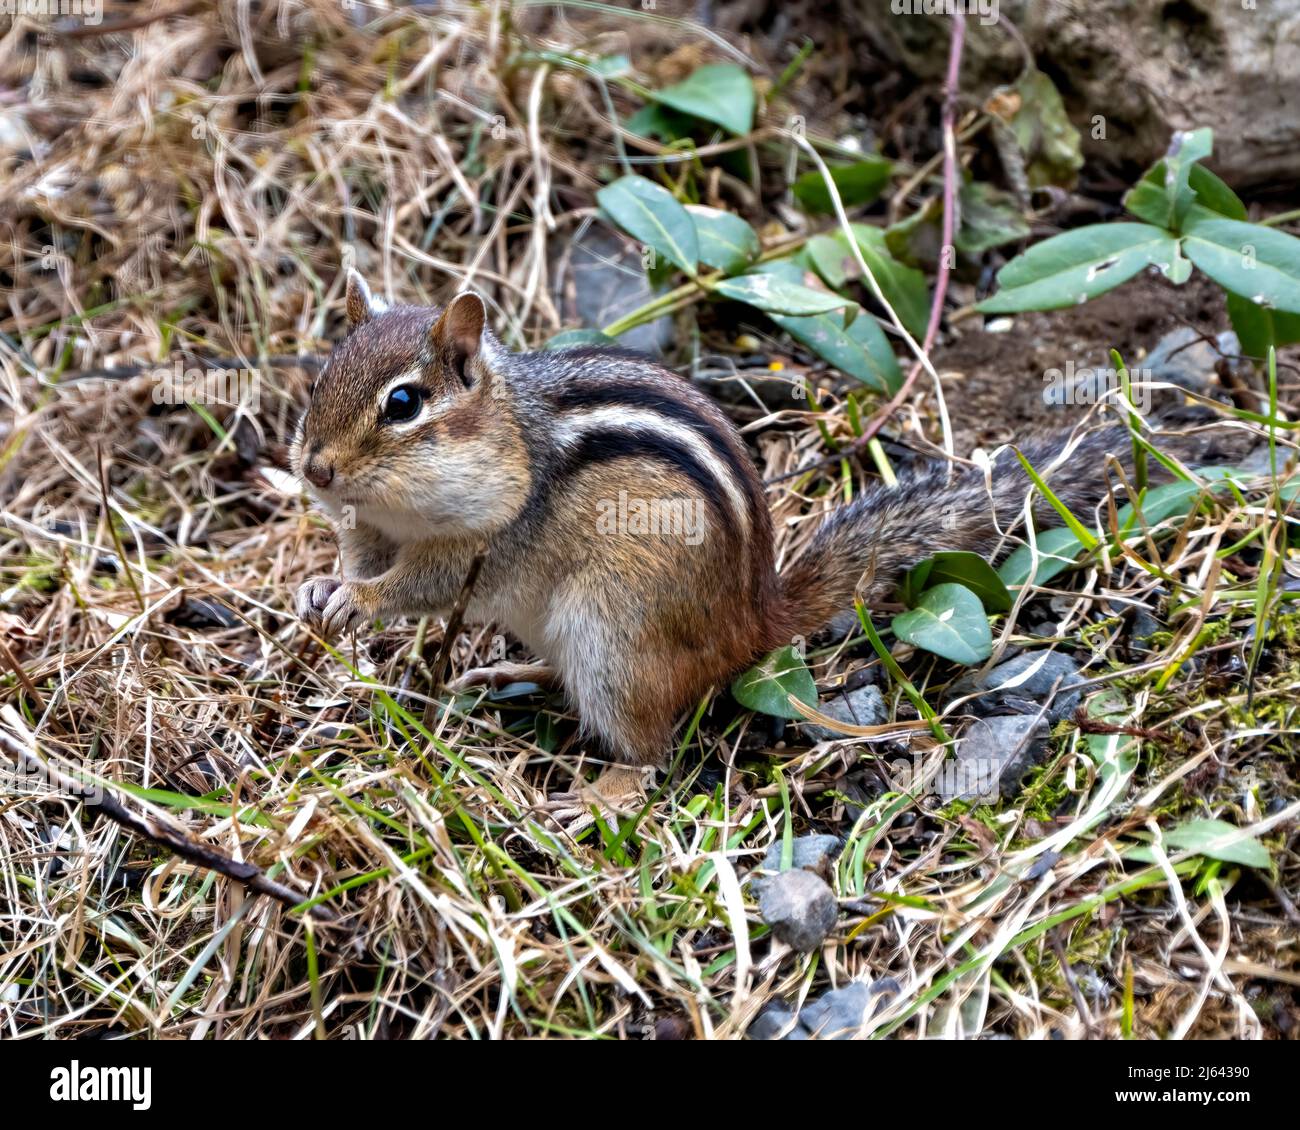 Chipmunk animal in the field displaying brown fur, body, head, eye, nose, ears, paws, in its environment and habitat surrounding. Stock Photo